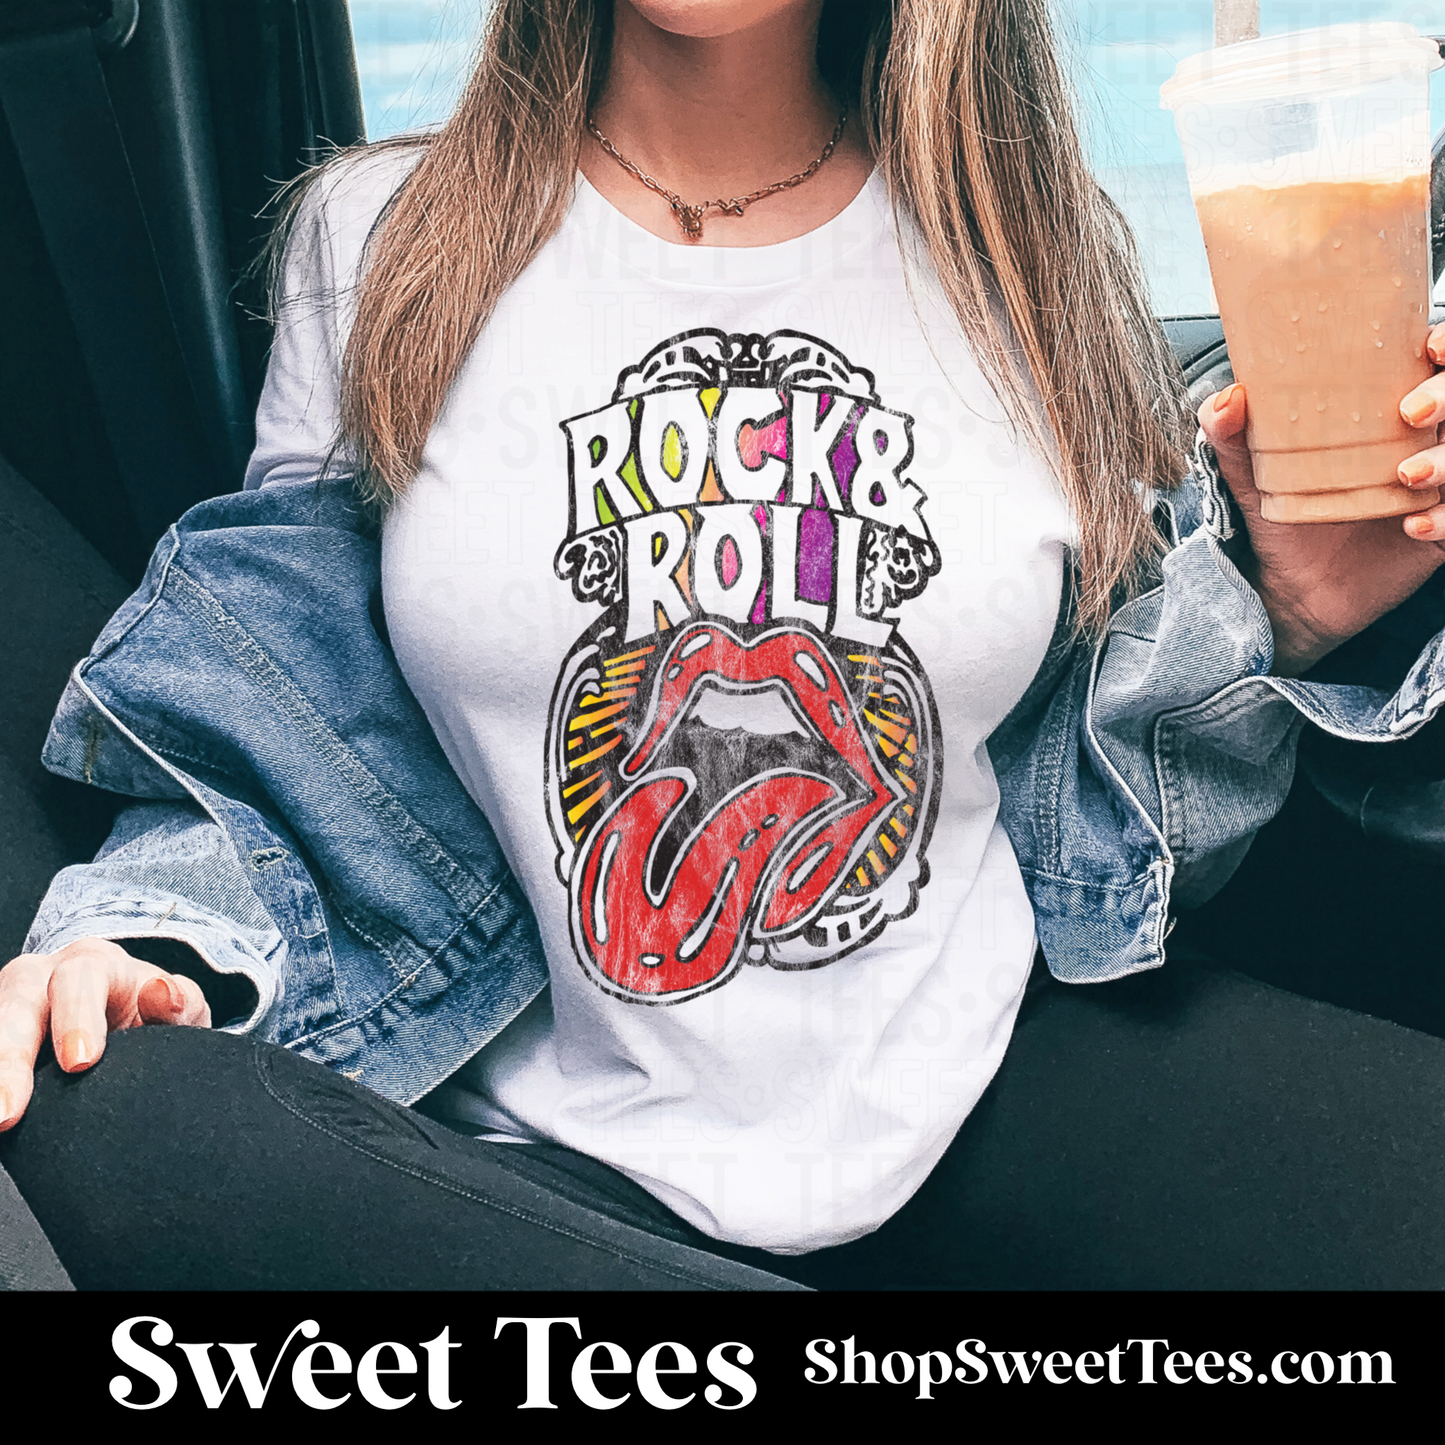 Retro Rock and Roll tee